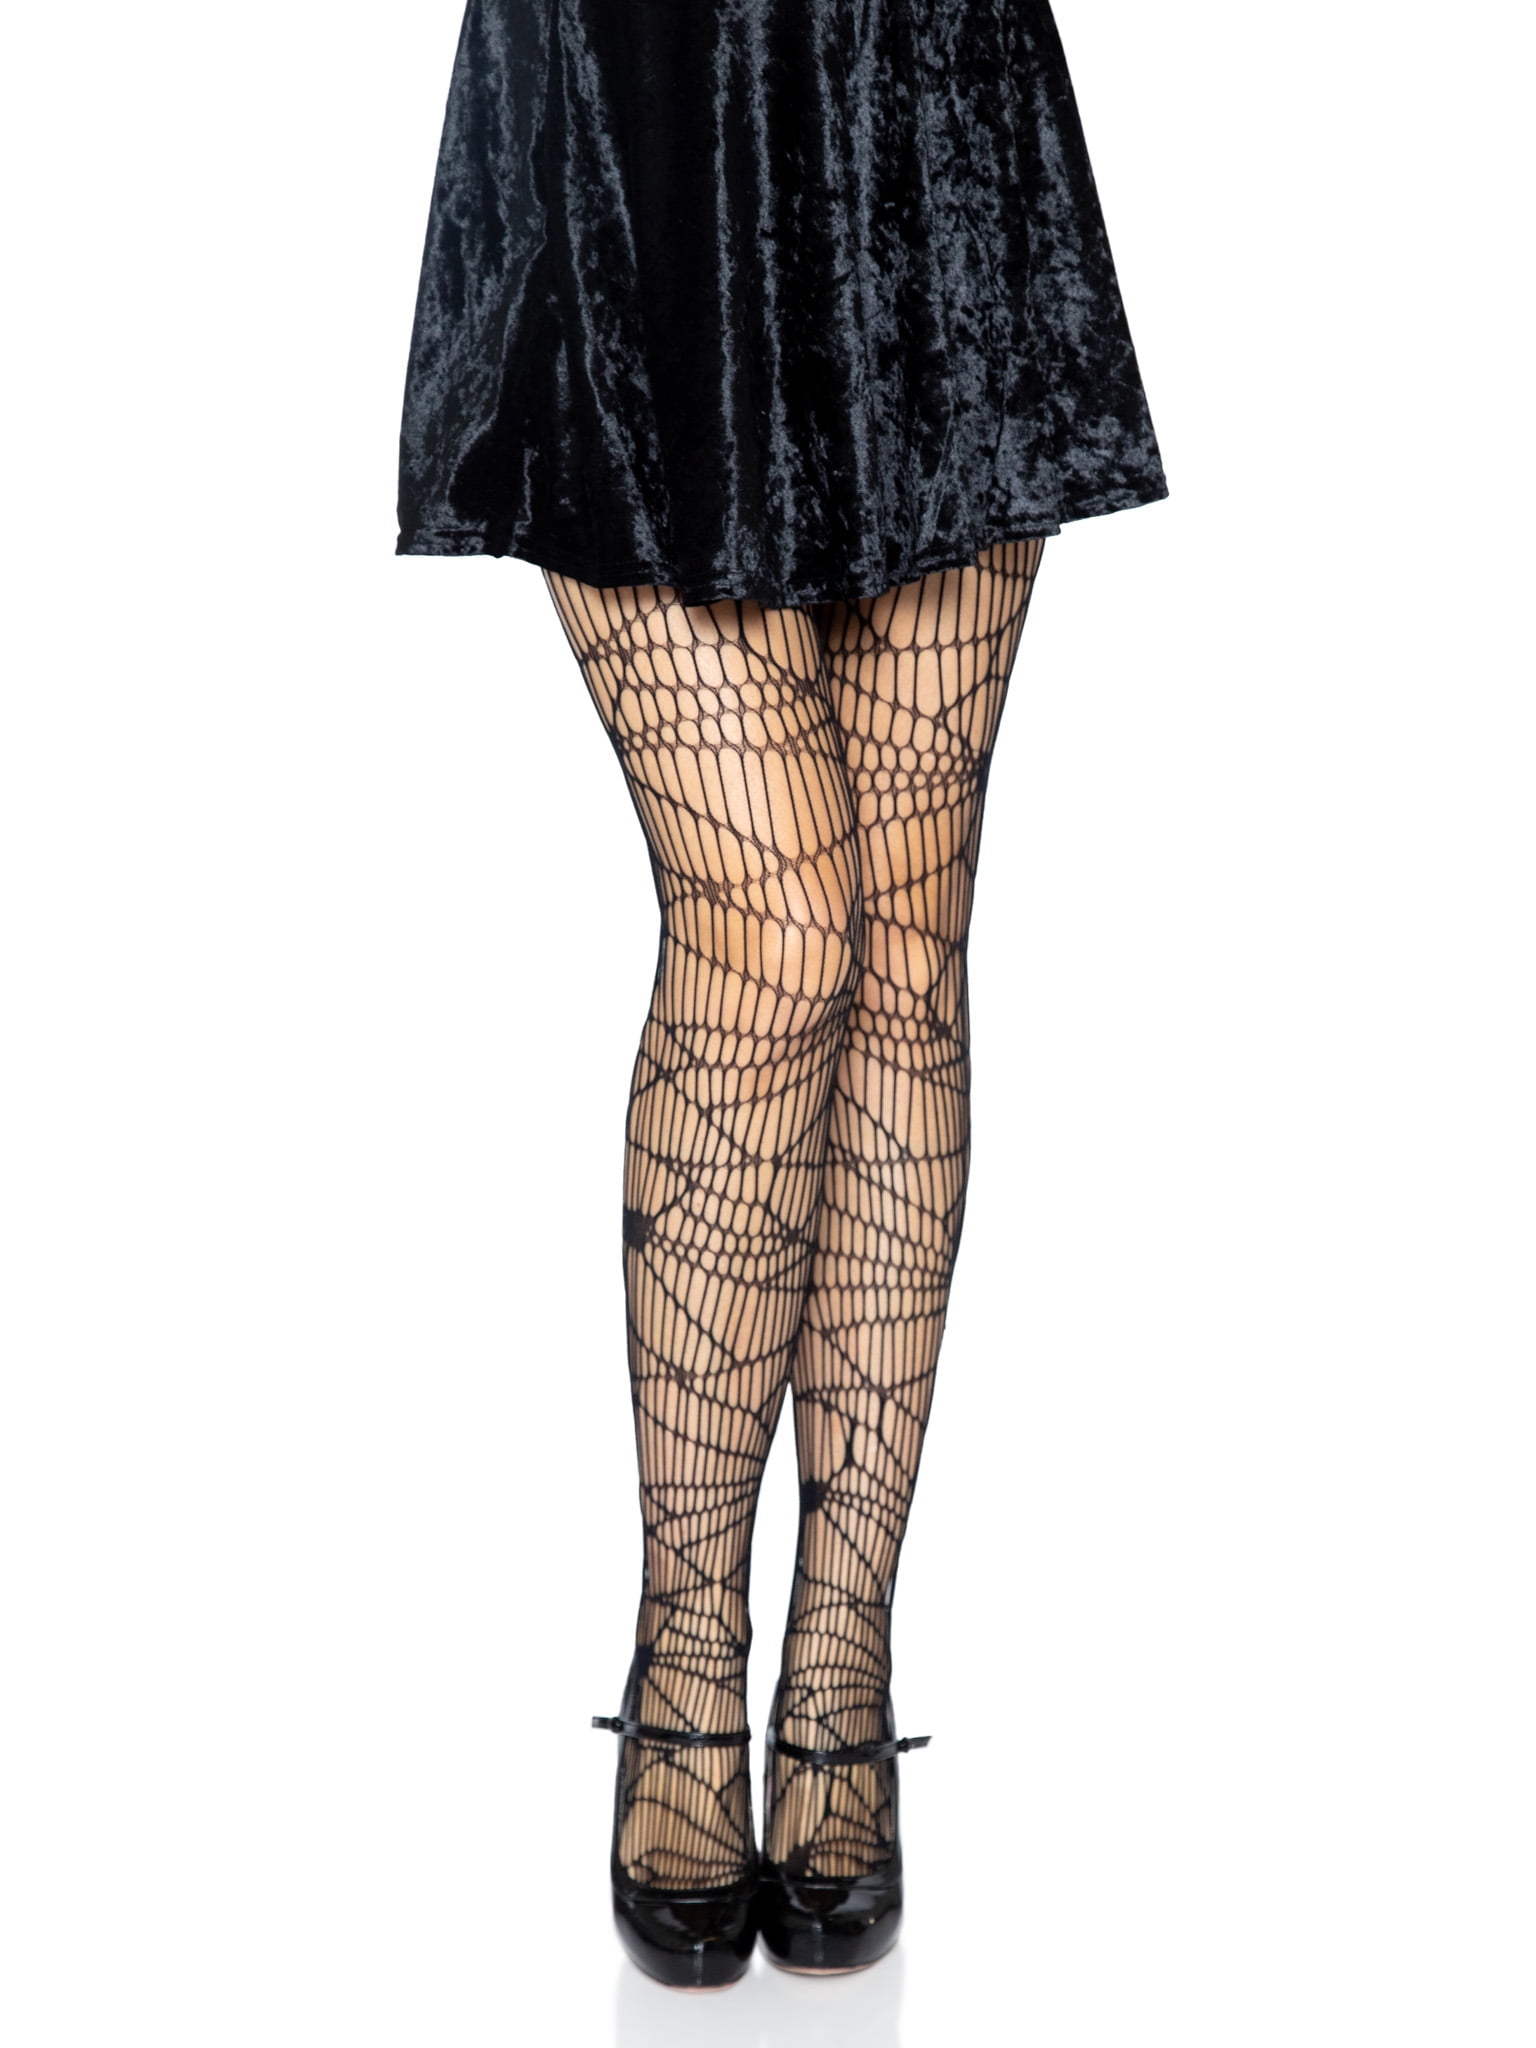 Halloween Women’s Sheer Spider Web Fishnet Tights, Black, One Size, by ...